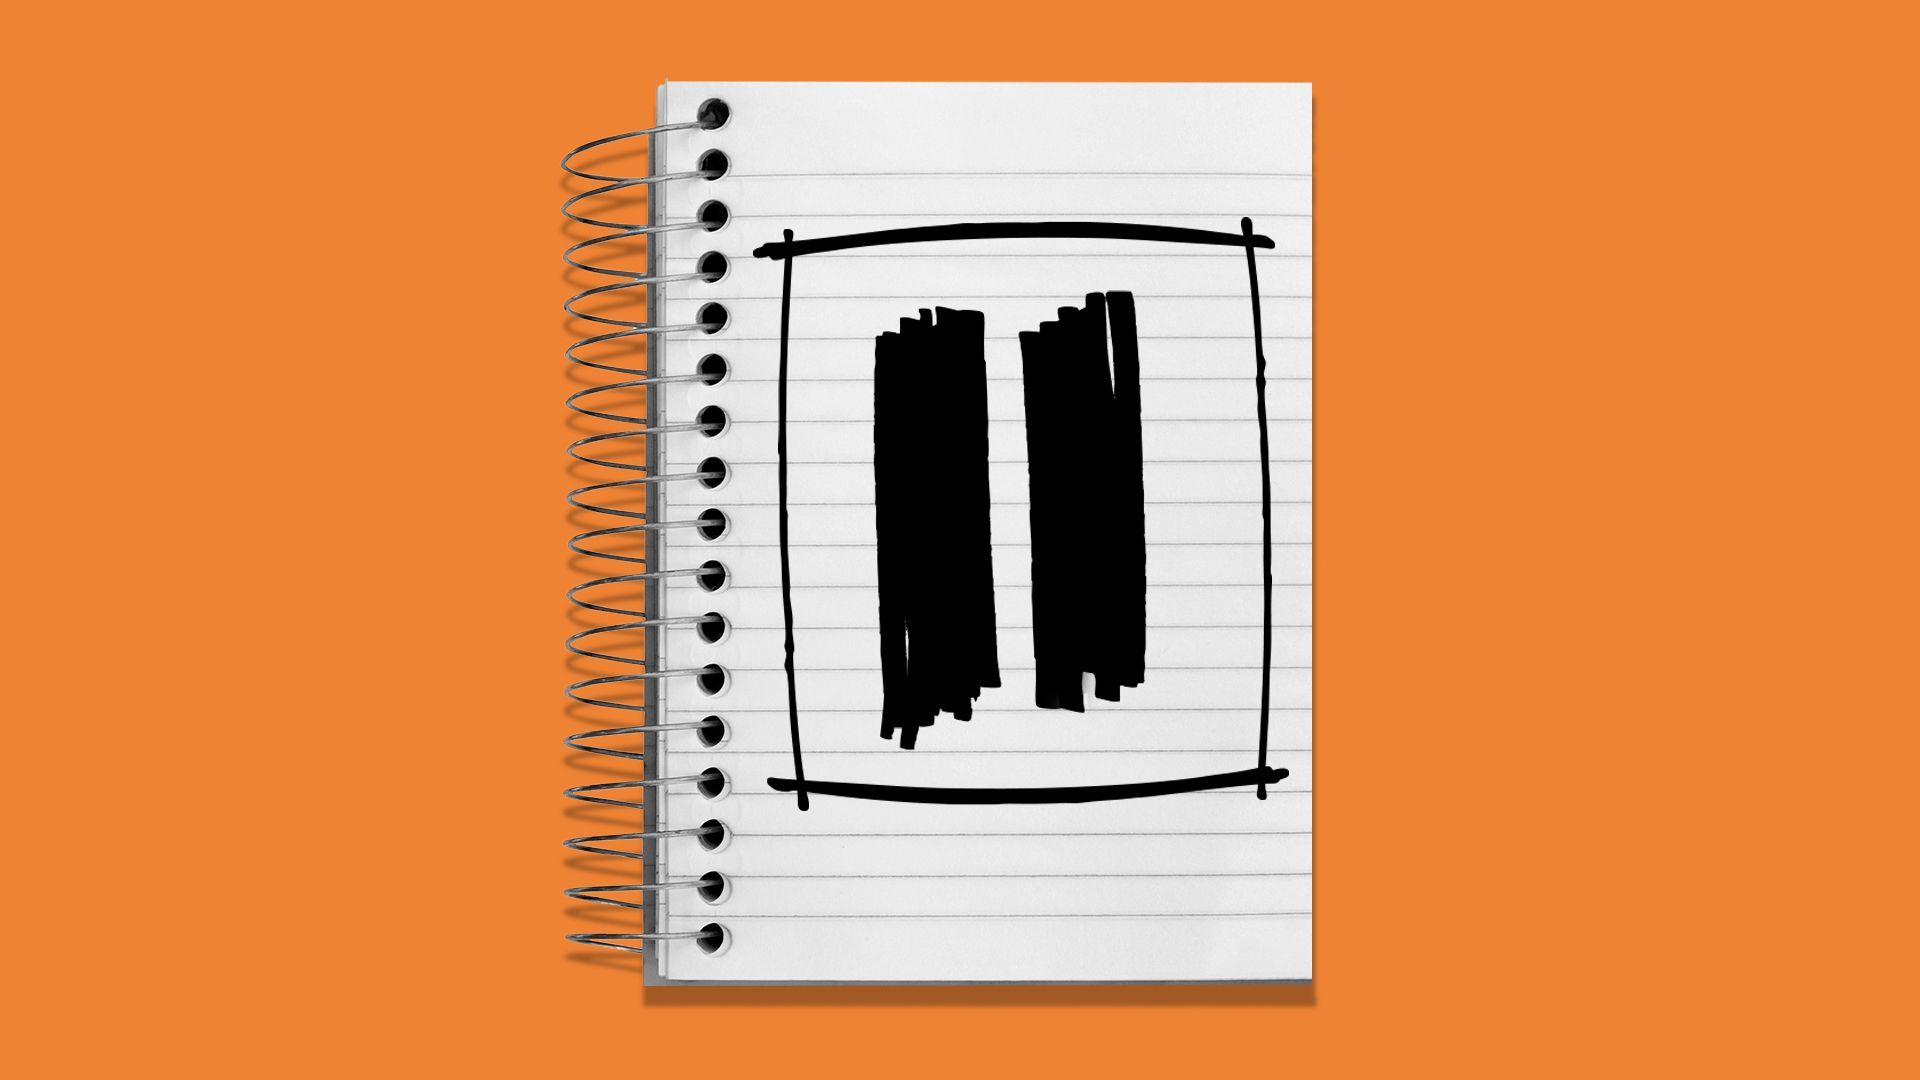 Illustration of a notepad with a pause symbol drawn on it